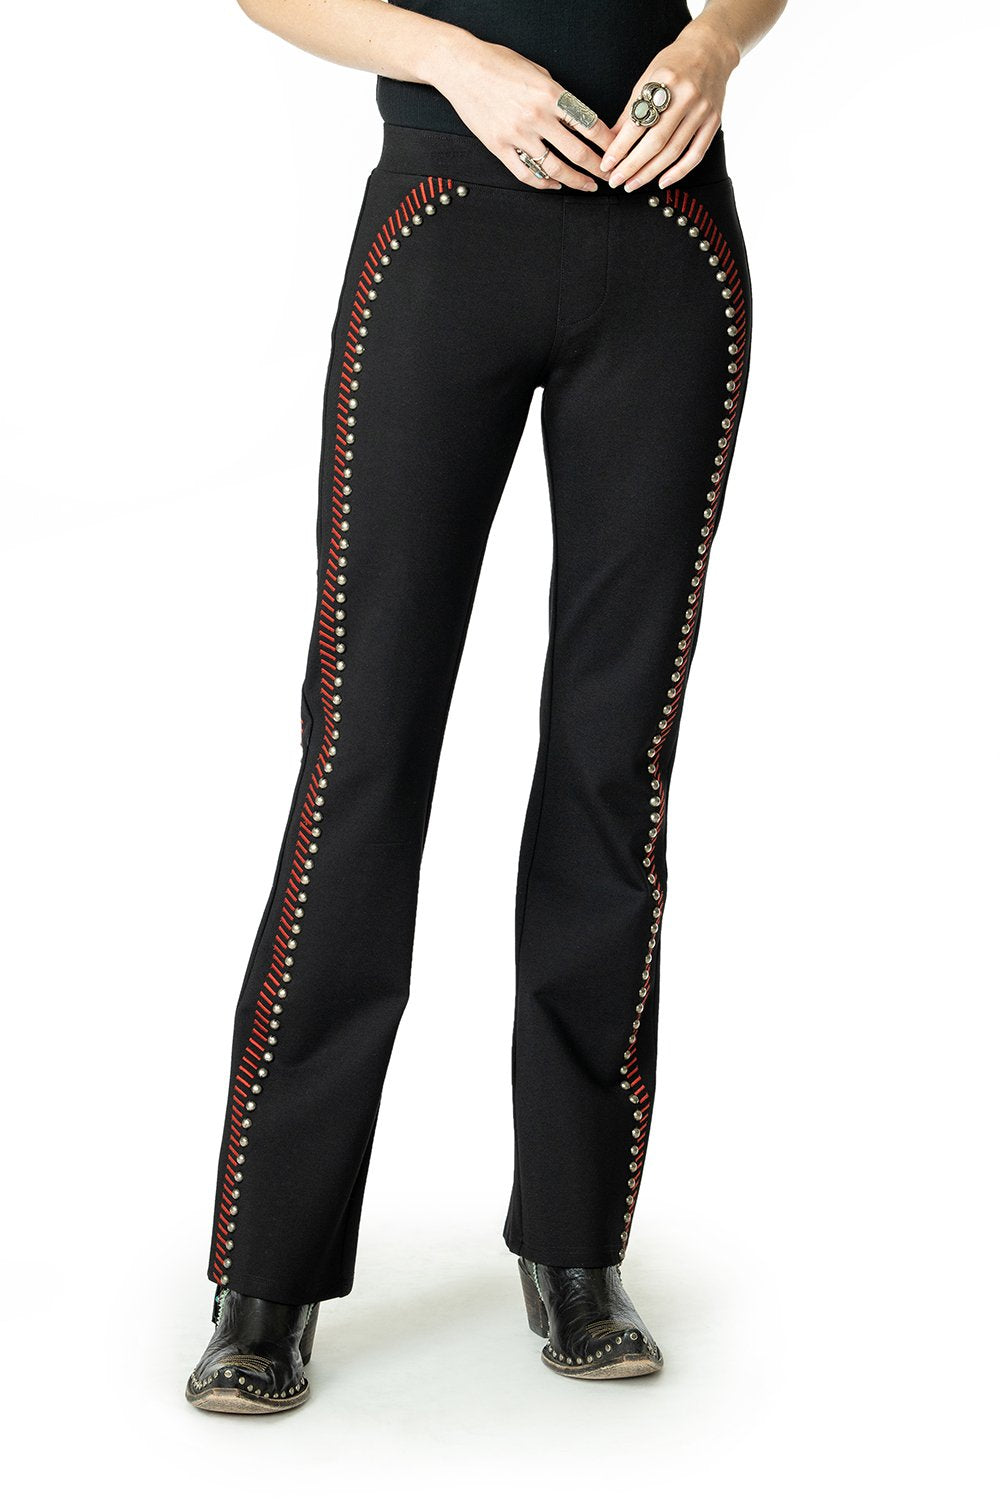 Load image into Gallery viewer, Double D Ranch Long Black Train Pant in Racehorse Red 6Whiskey Nashville Fall 2020 P478
